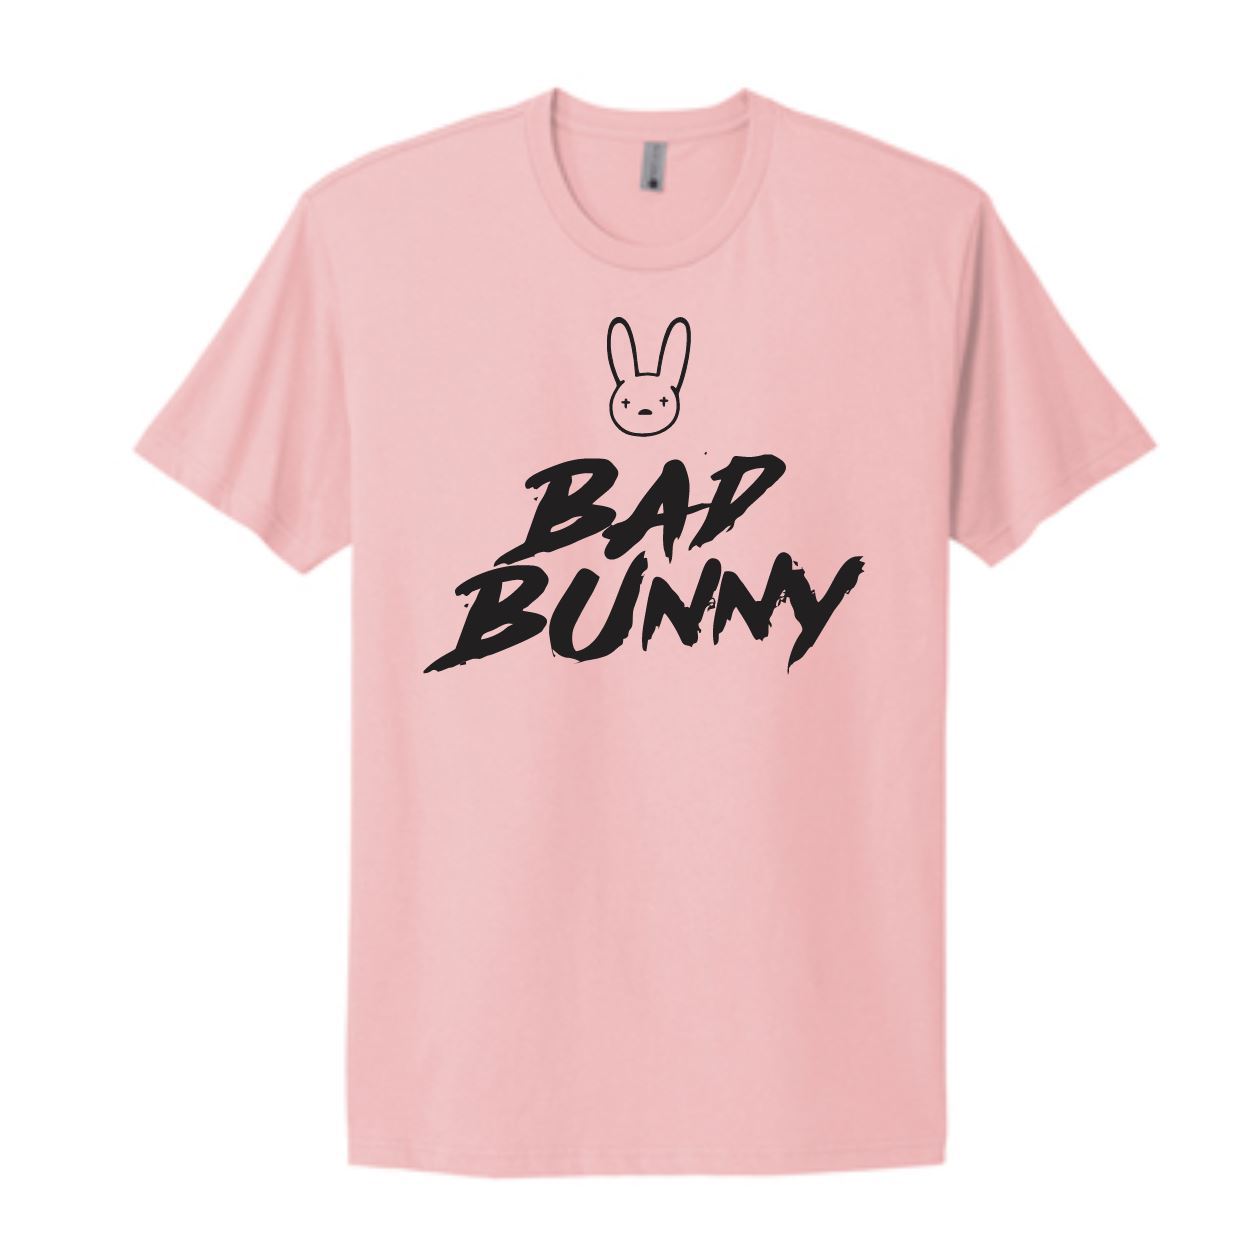 New in! 🐰 light pink